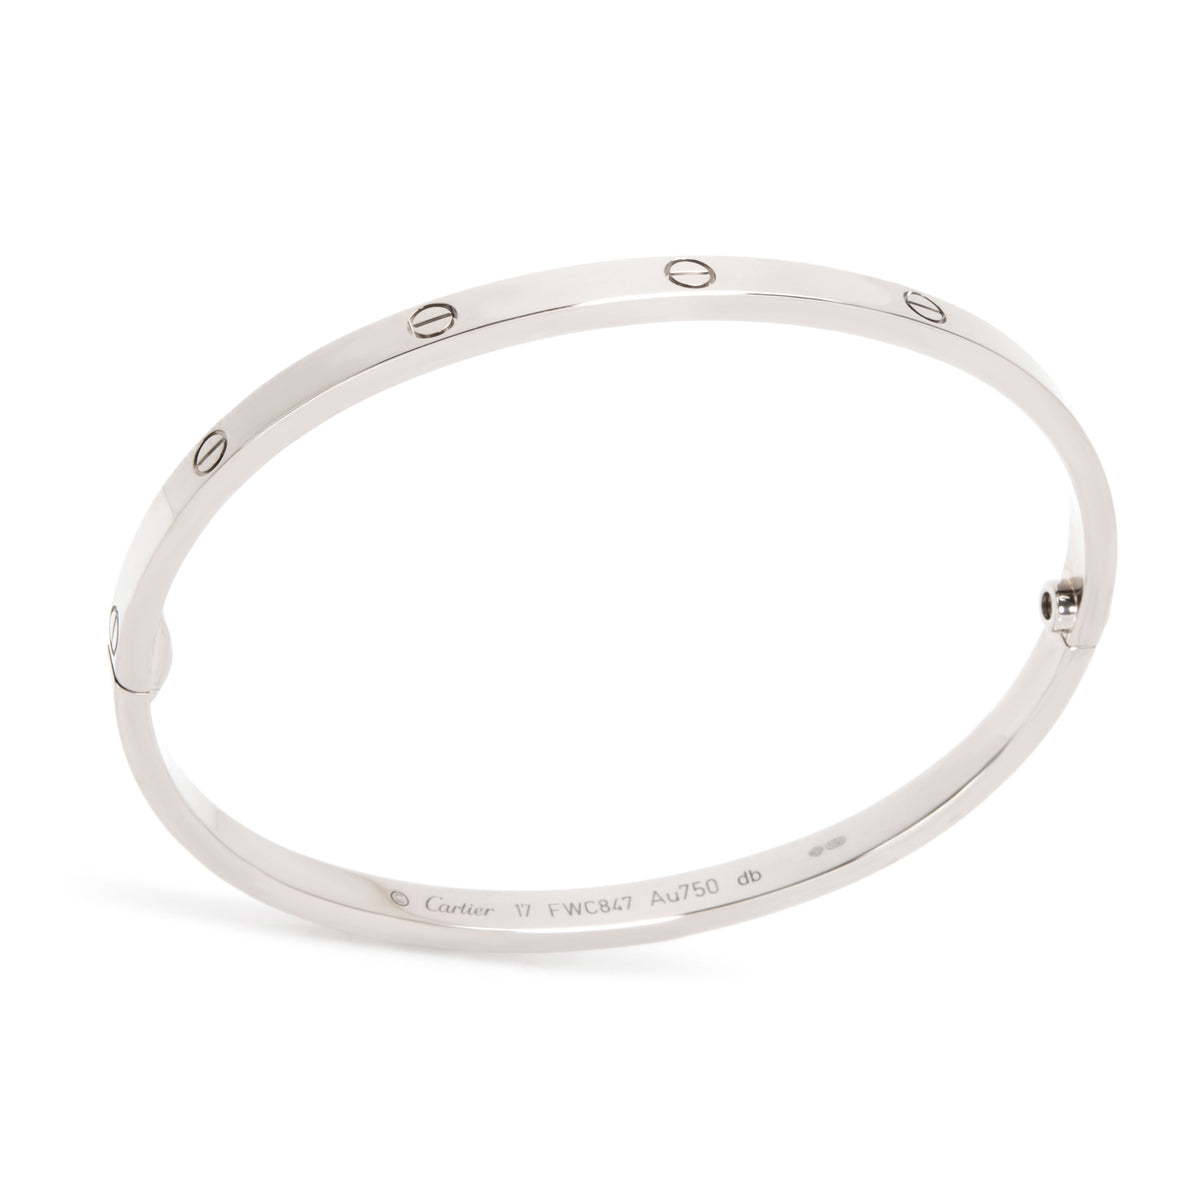 Cartier Small Love Bangle in 18K White Gold Size 17